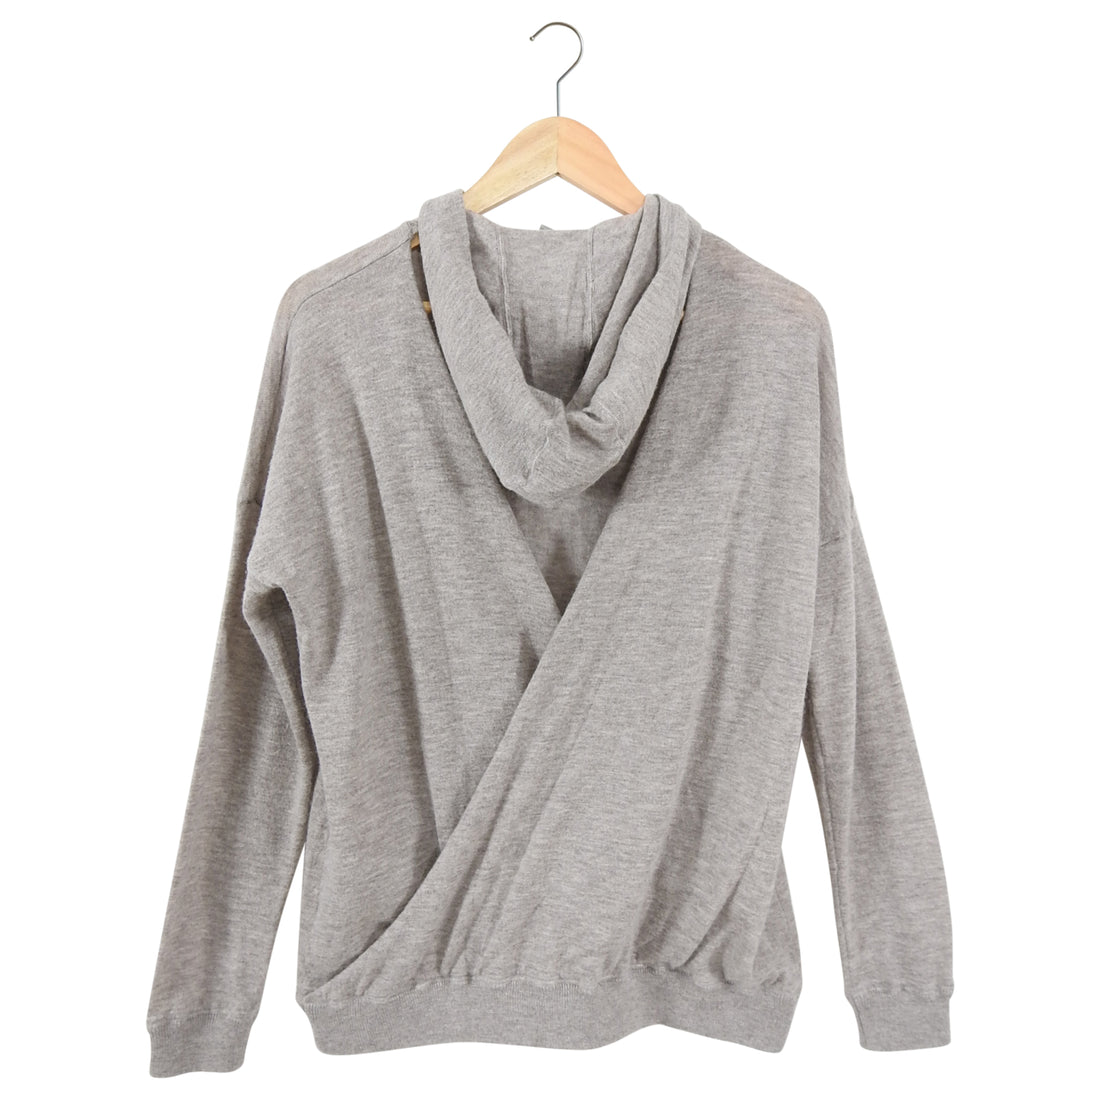 Eleventy Light Taupe Cashmere Open Back Hoodie Sweater - M